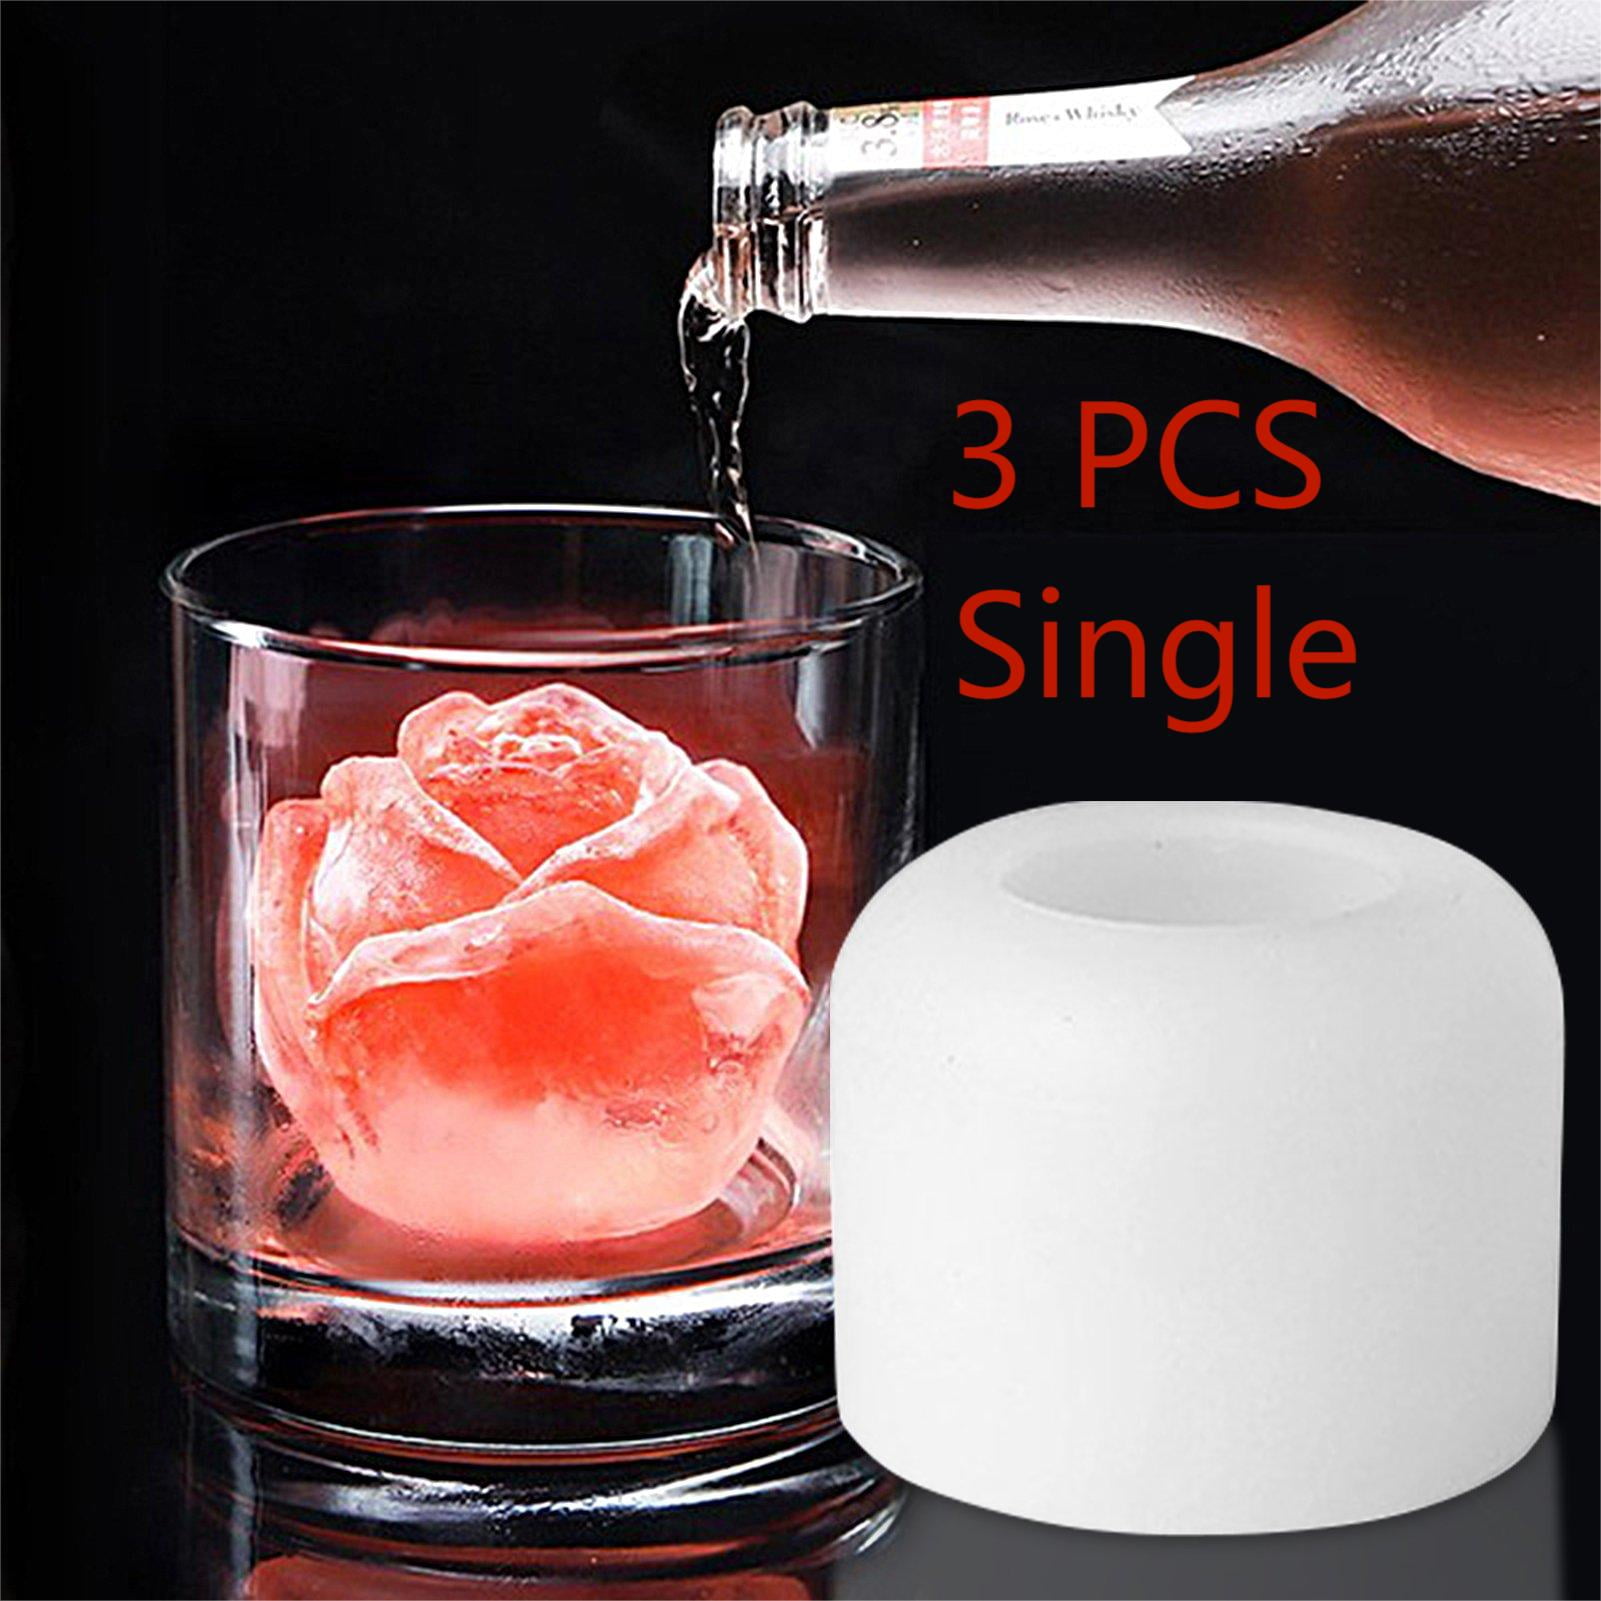 Bobasndm Diamond Rose Ice Mold & Large Ice Cube Trays,12 Cavities 3D Fancy  Shape,Silicone Rubber Funny Cool Ice Ball Maker for Chilling Cocktail Juice